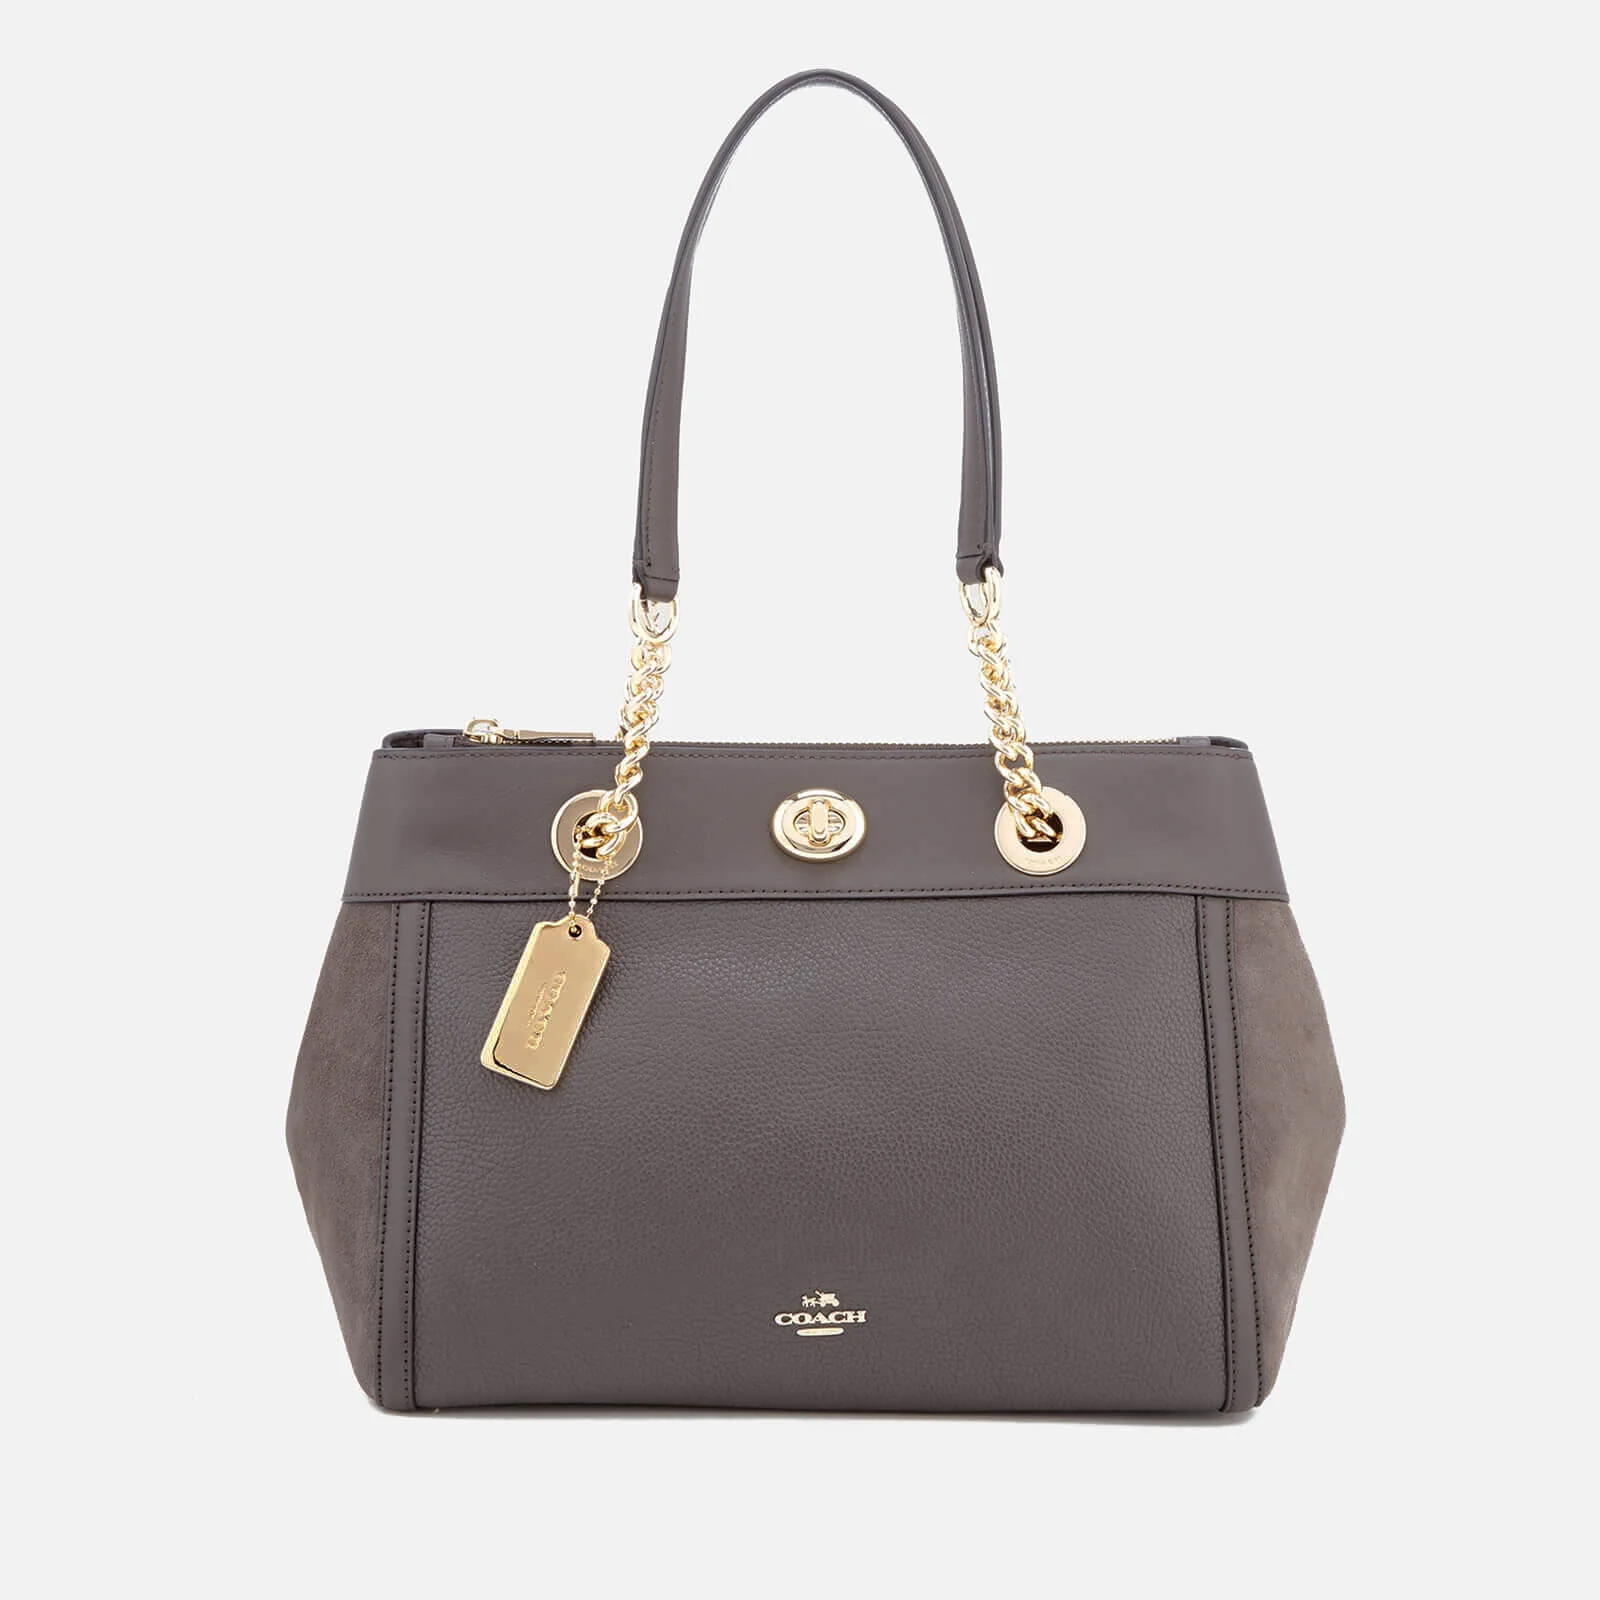 Coach Women's Turnlock Edie Carry All Bag - Chestnut Image 1